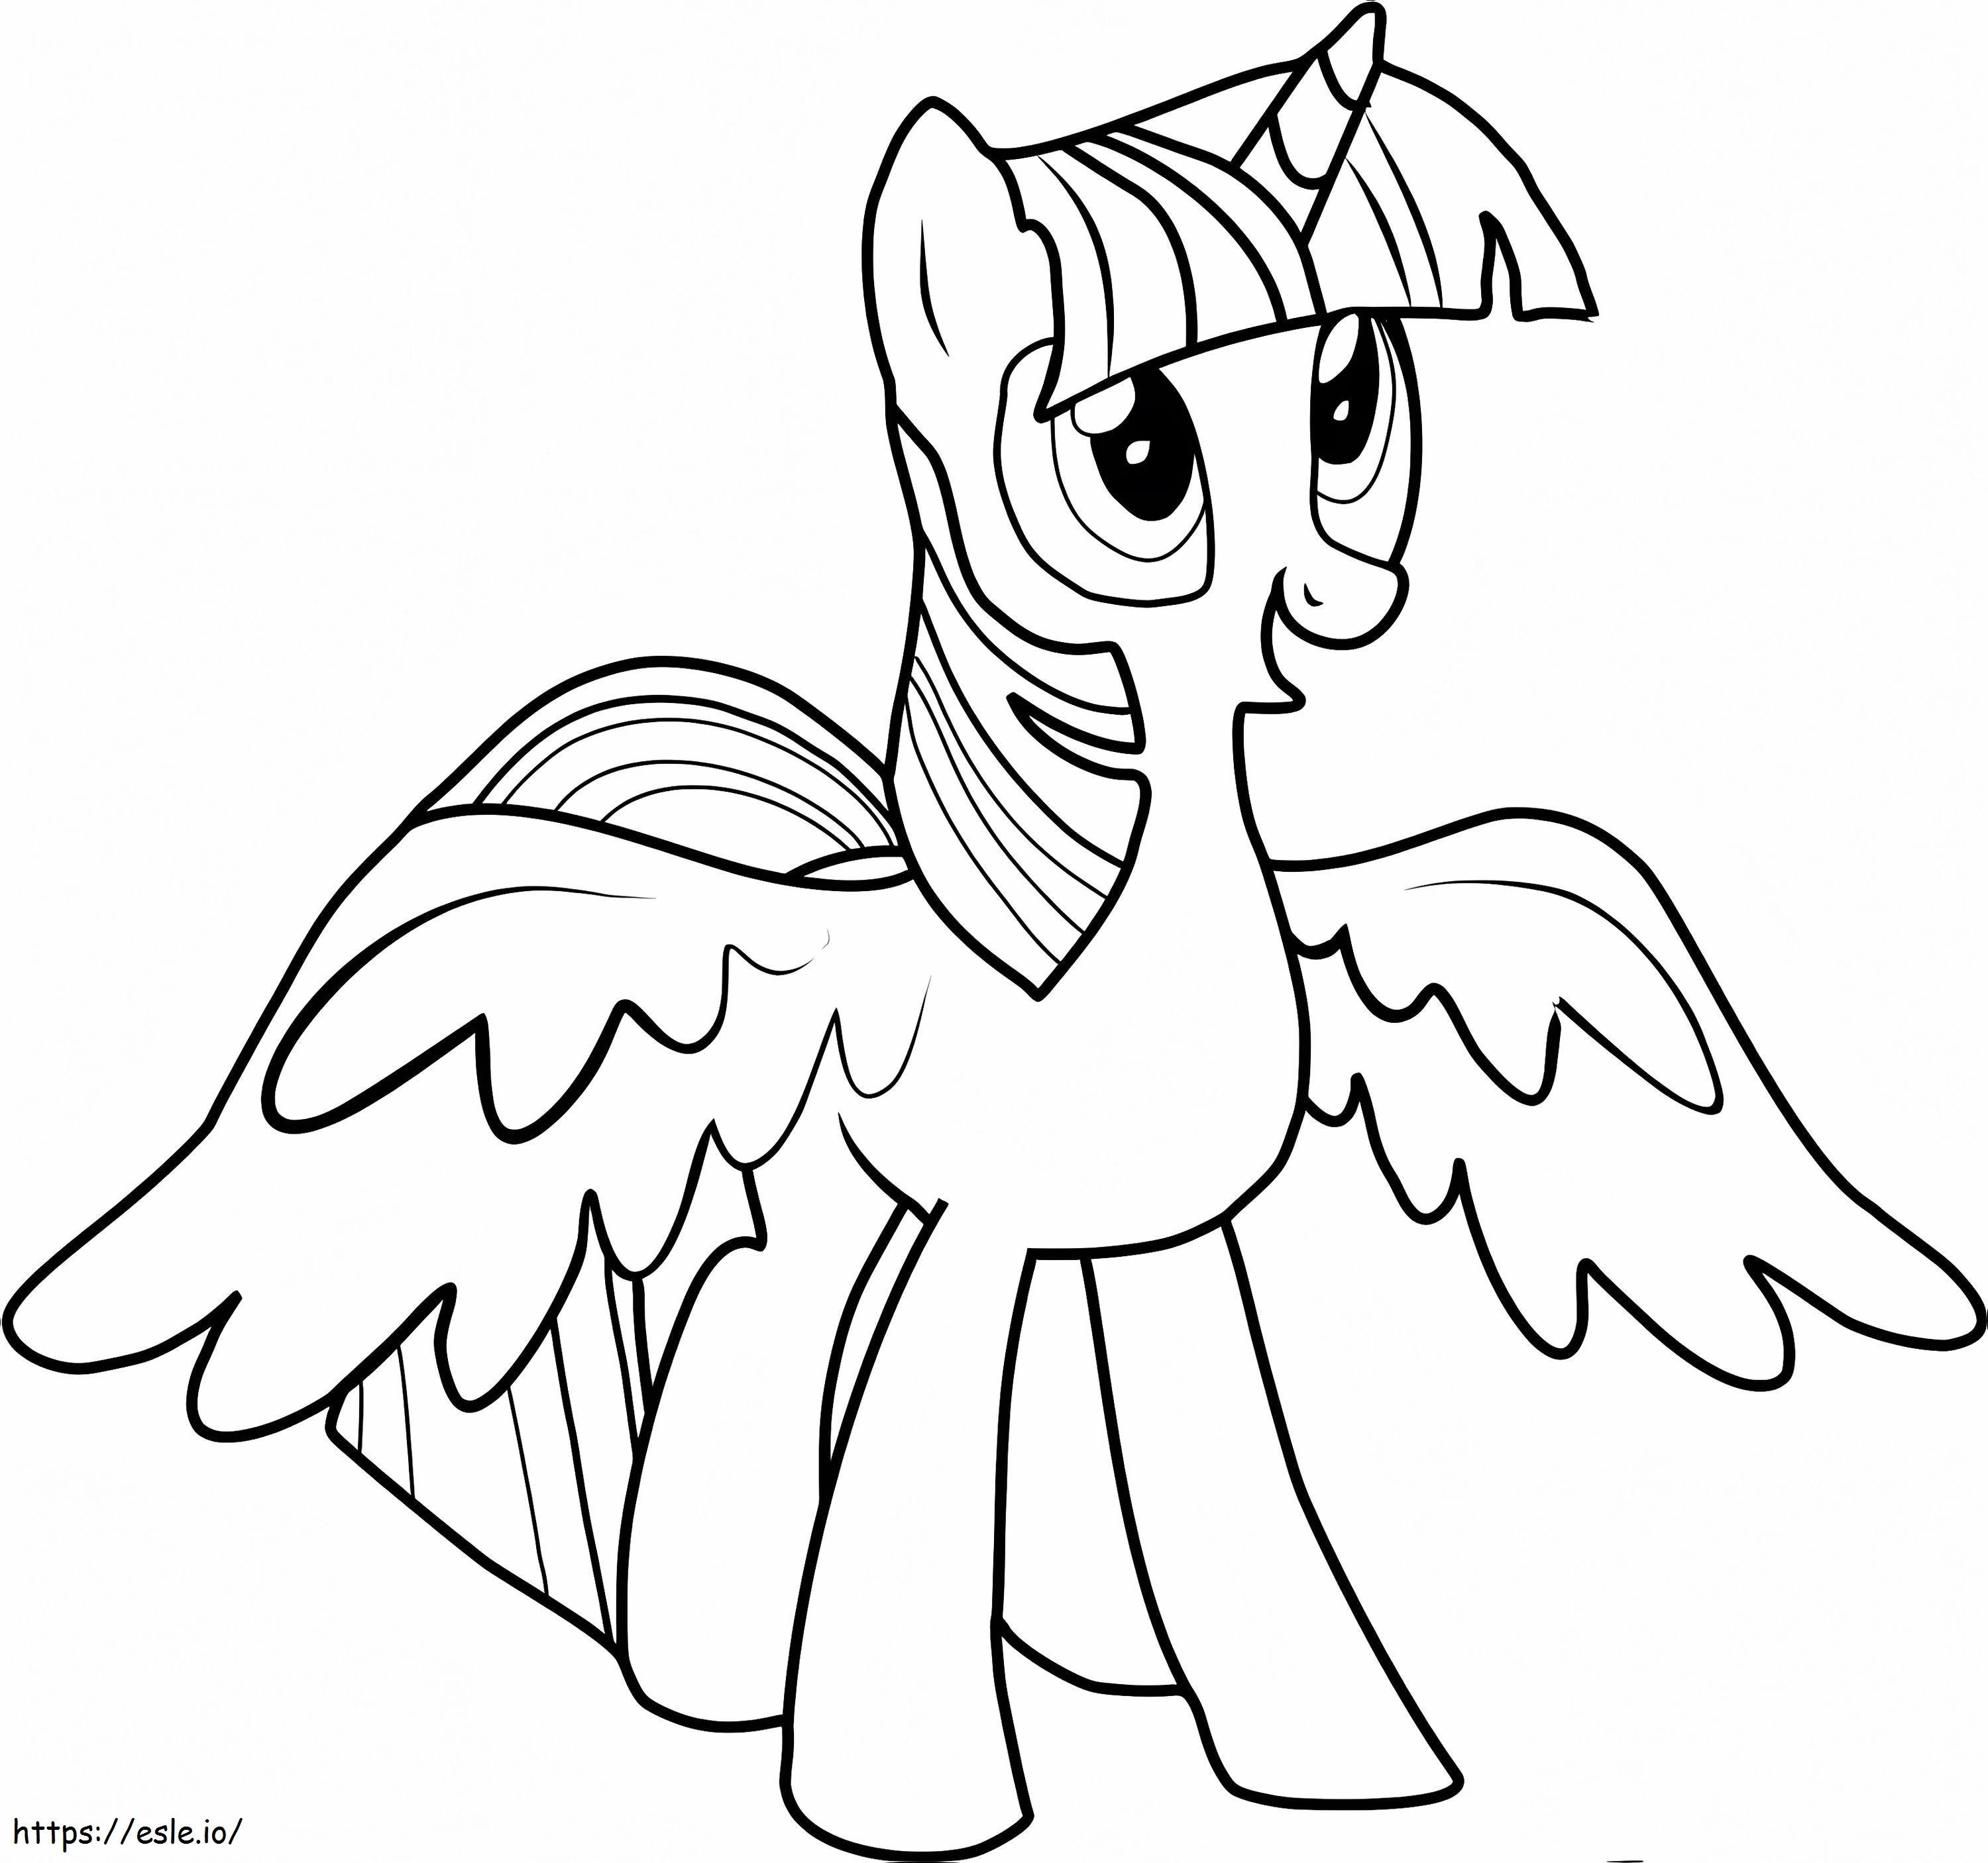 Free Twilight Sparkle To Print coloring page